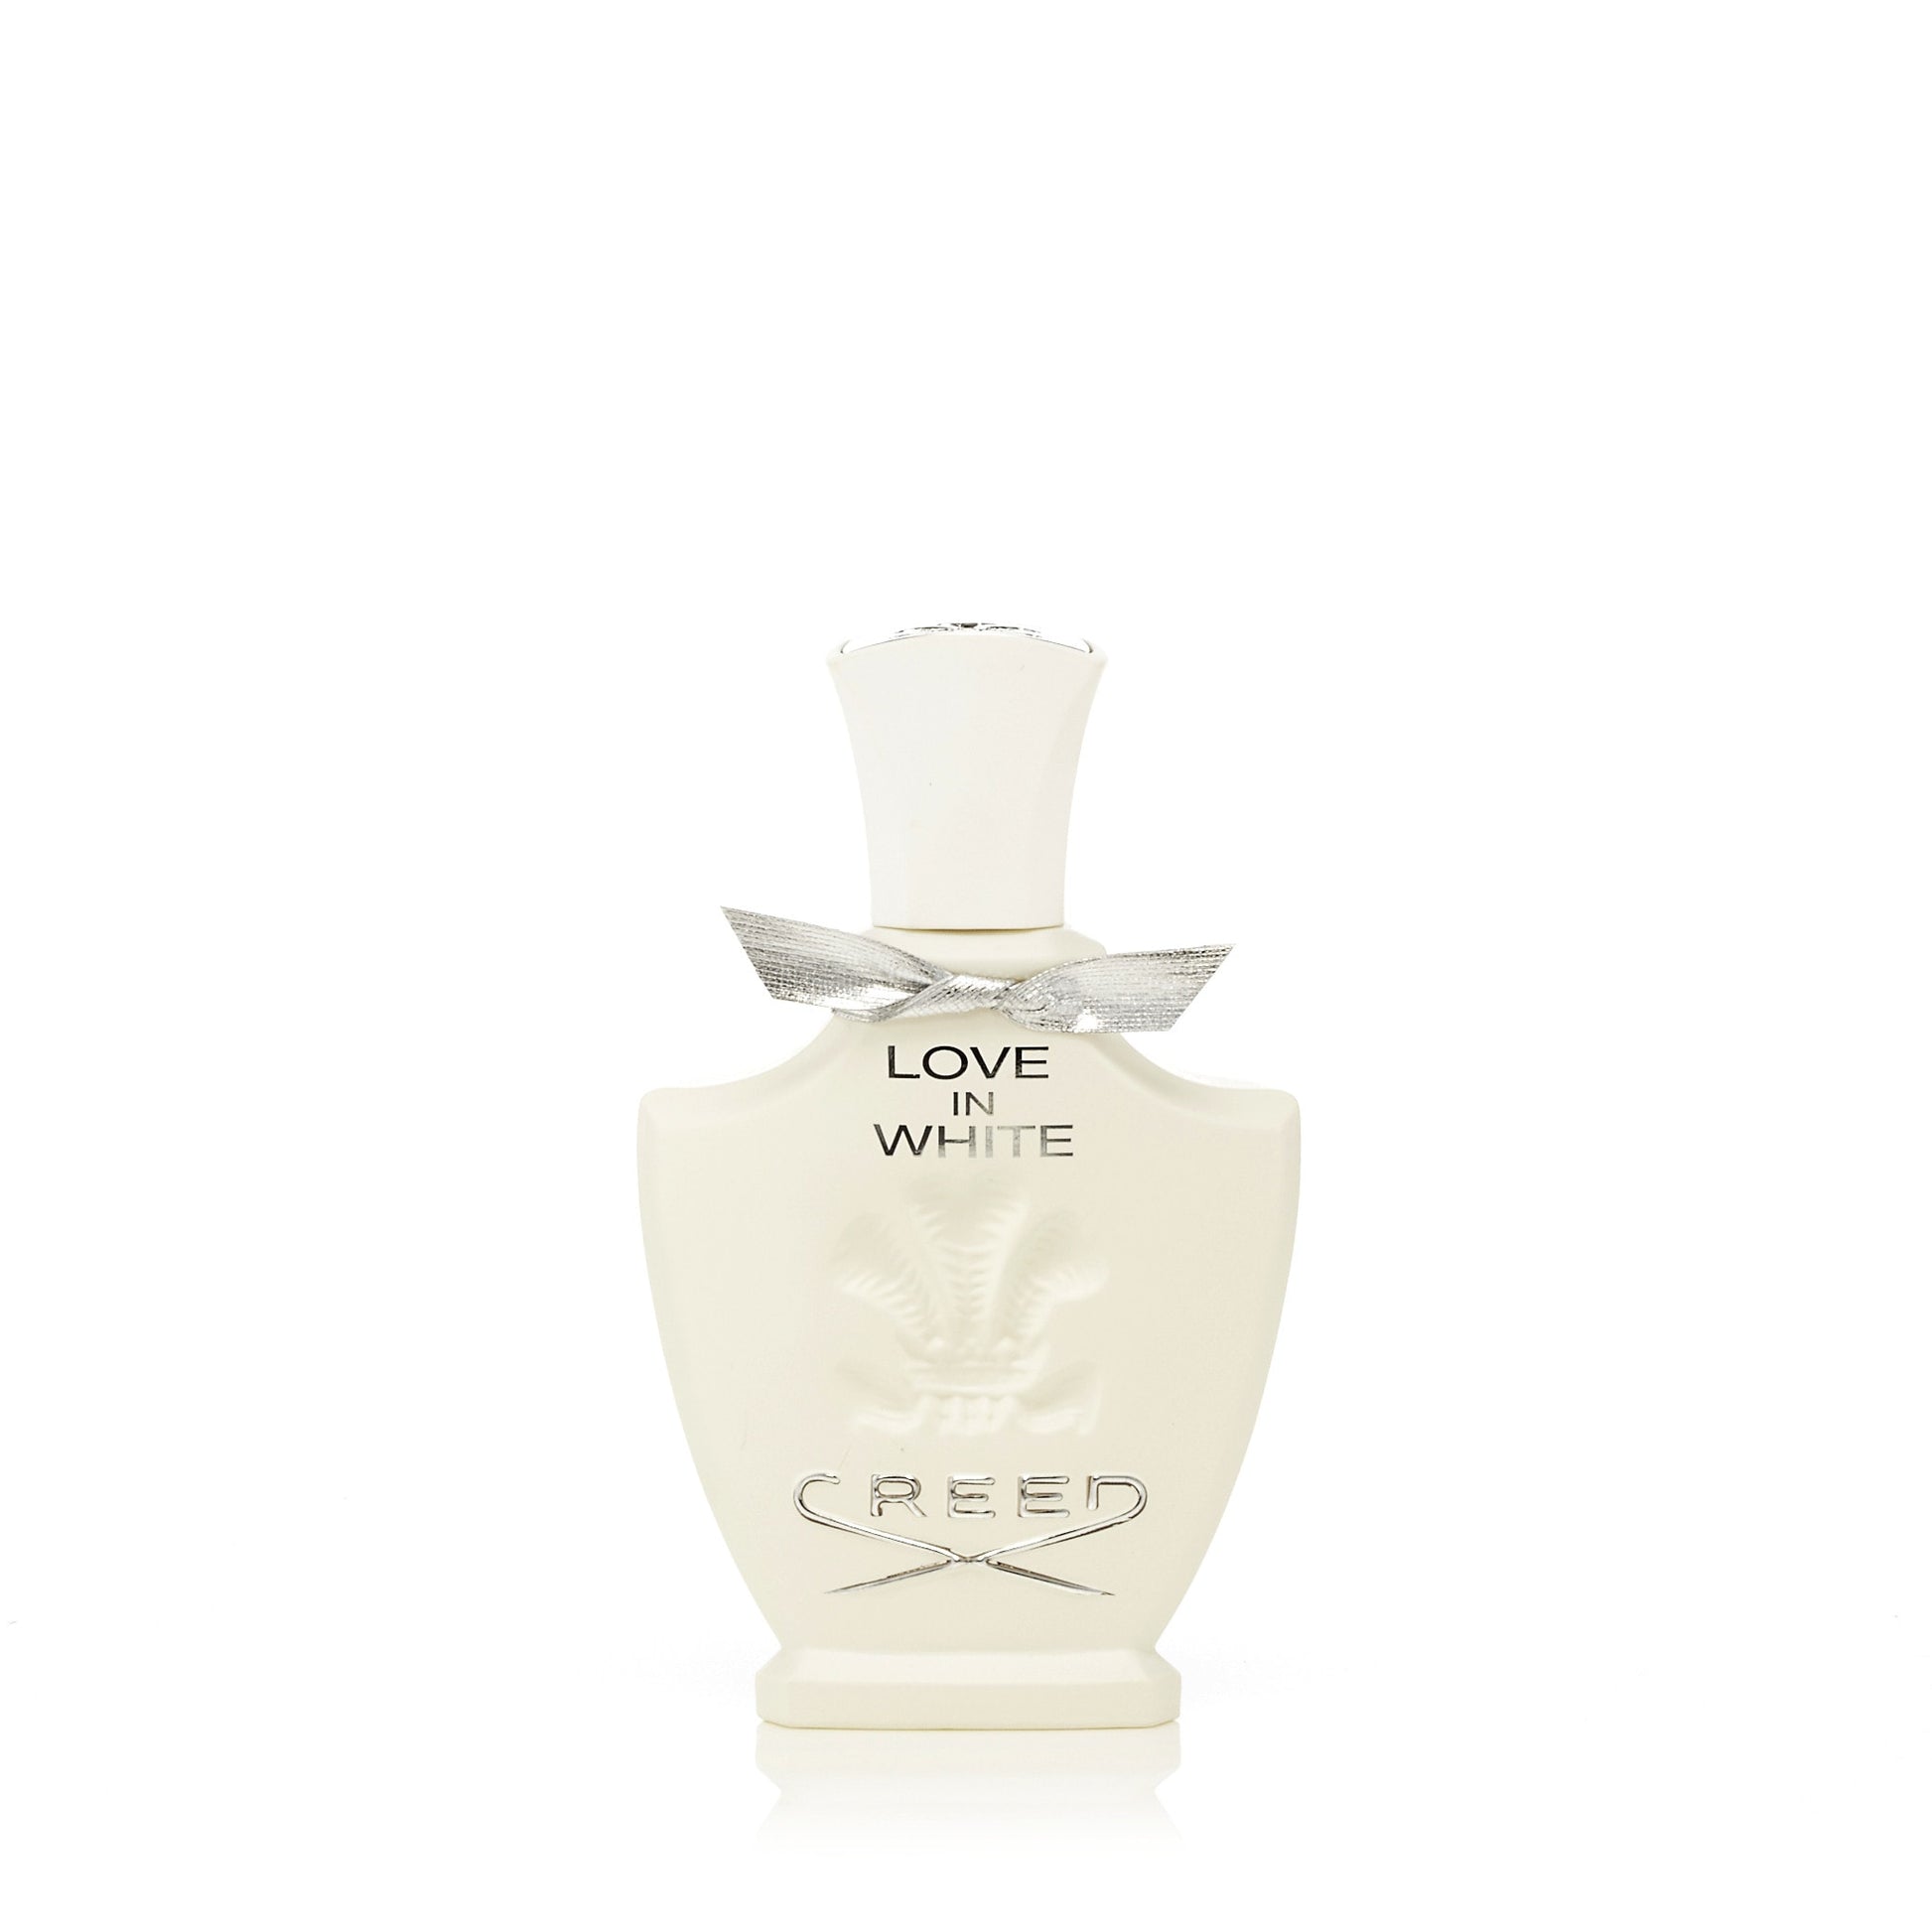 Love In White Eau de Parfum Spray for Women by Creed, Product image 1